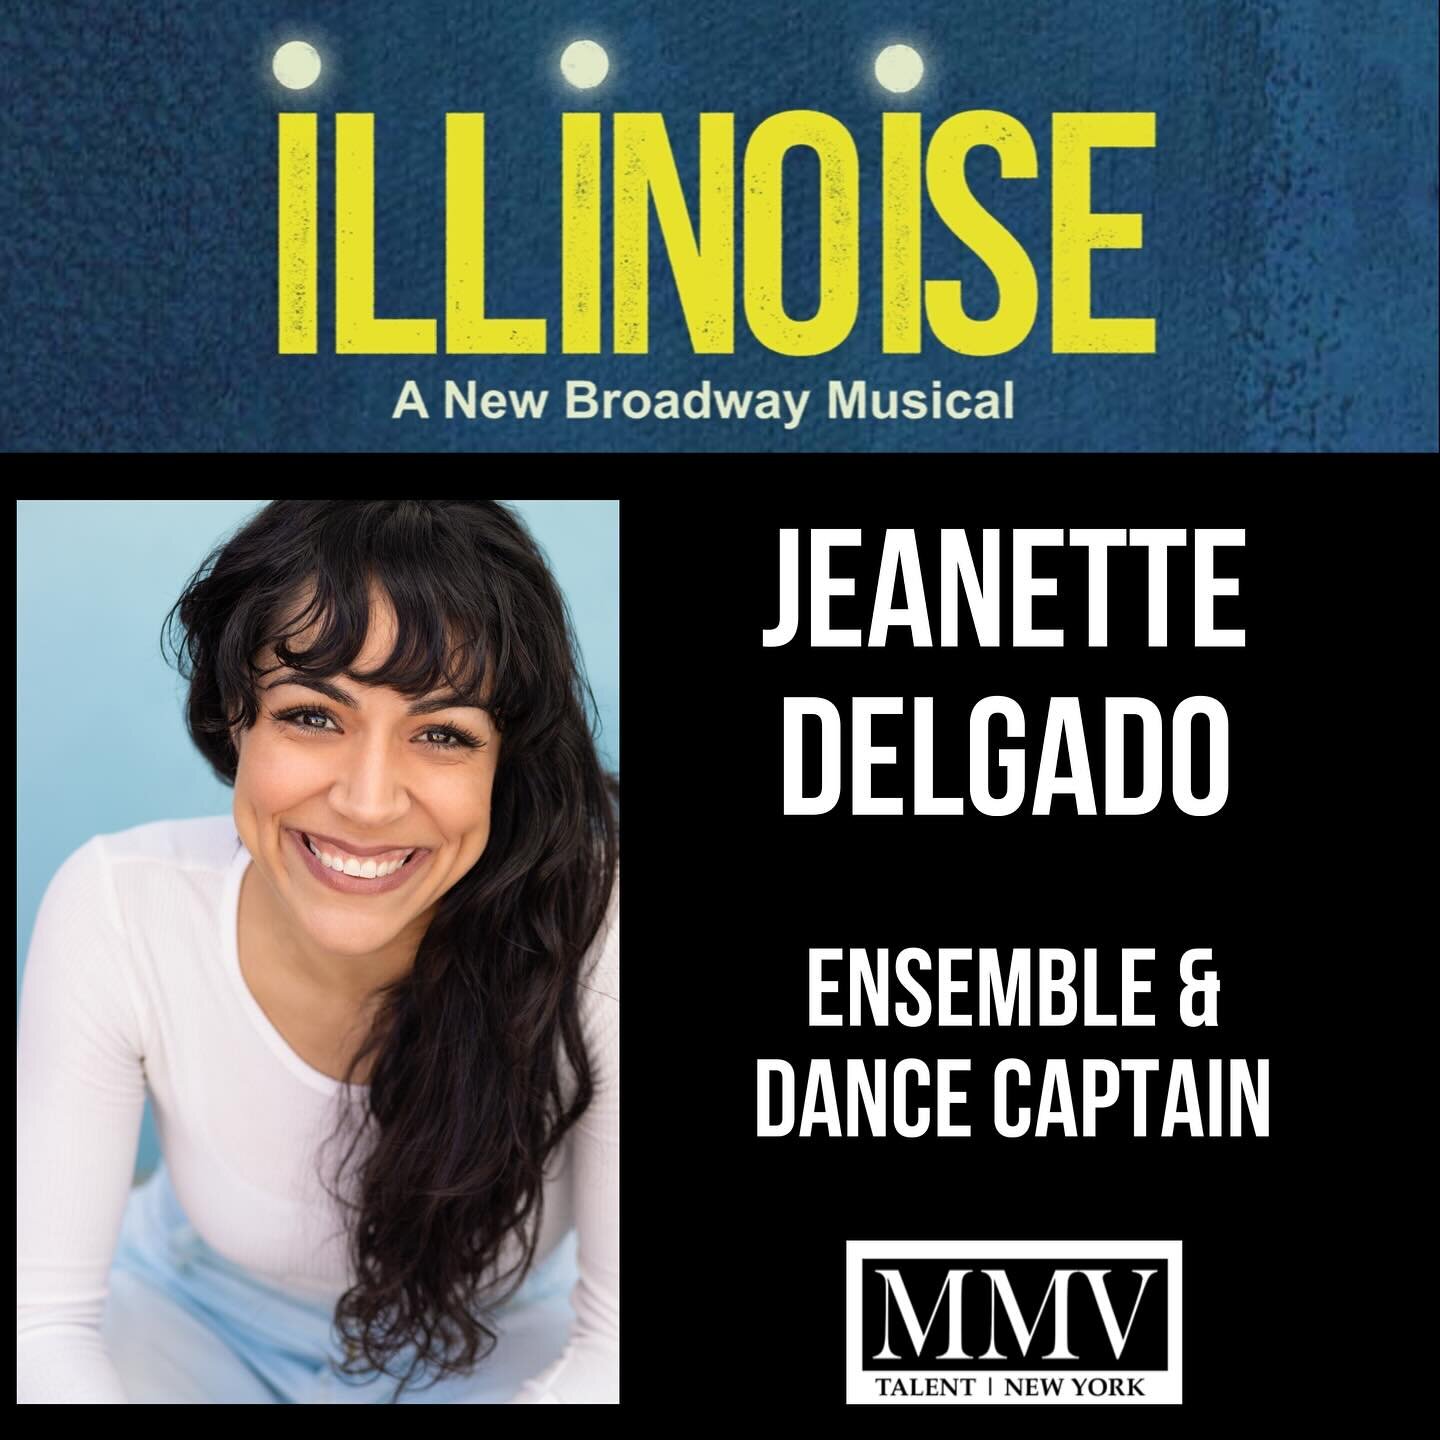 JEANETTE DELGADO will be making her ✨Broadway Debut✨ in ILLINOISE!!!🤩
@jeanettedel 

This beautiful piece is not to be missed. Starting April 24 for 16 weeks at The St. James Theatre!

#mmvtalent